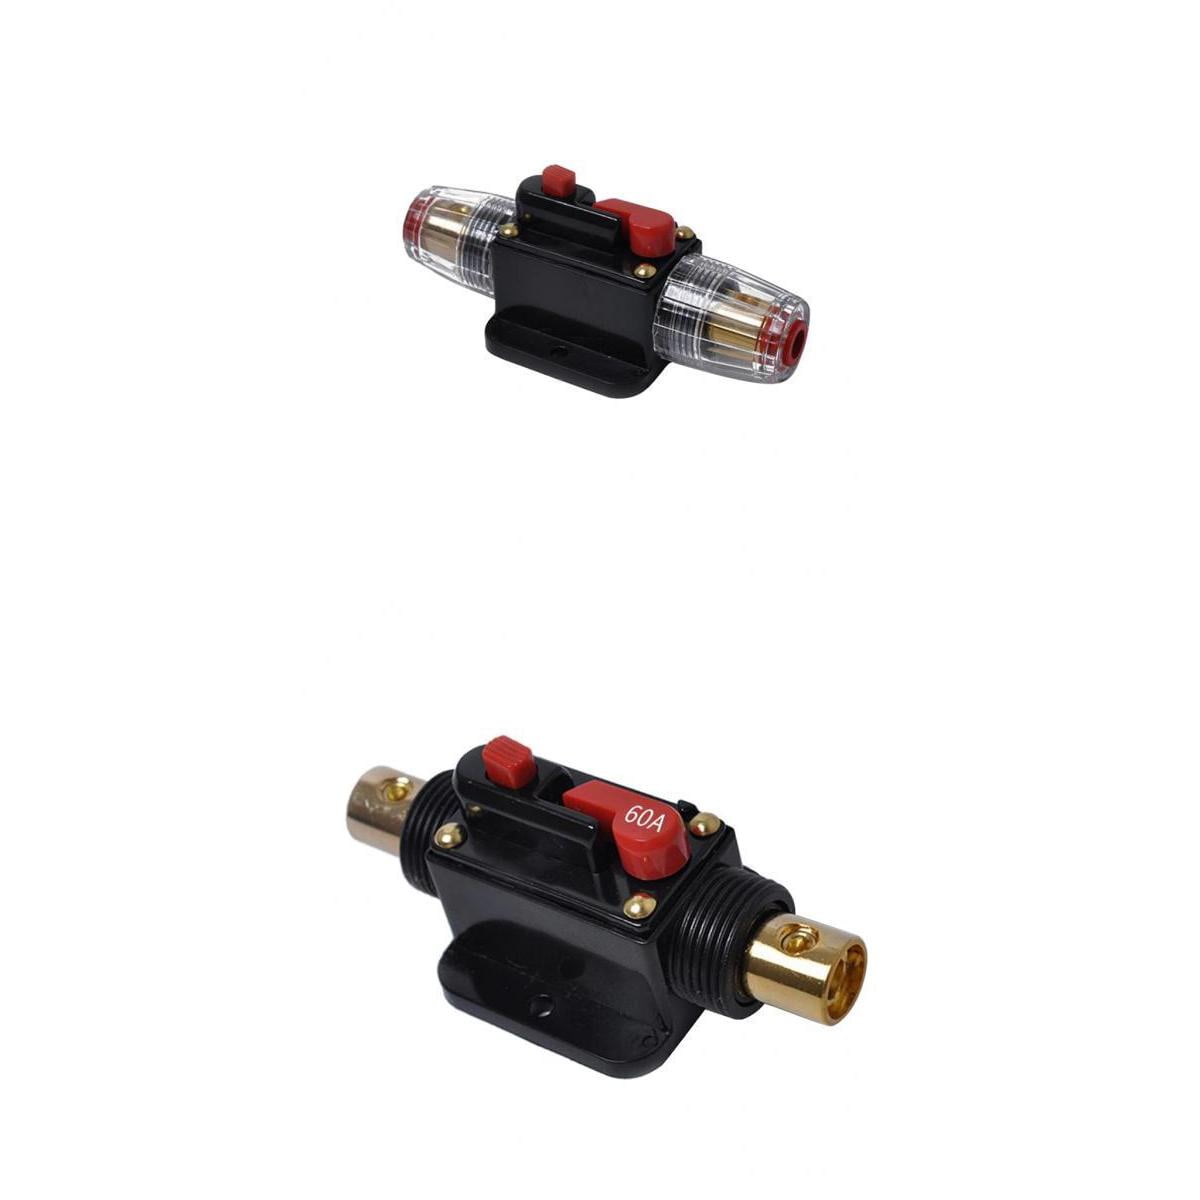 WATERPROOF CAR STEREO AUDIO CIRCUIT BREAKER FUSE INLINE FOR 12VDC A/V SYSTEM 